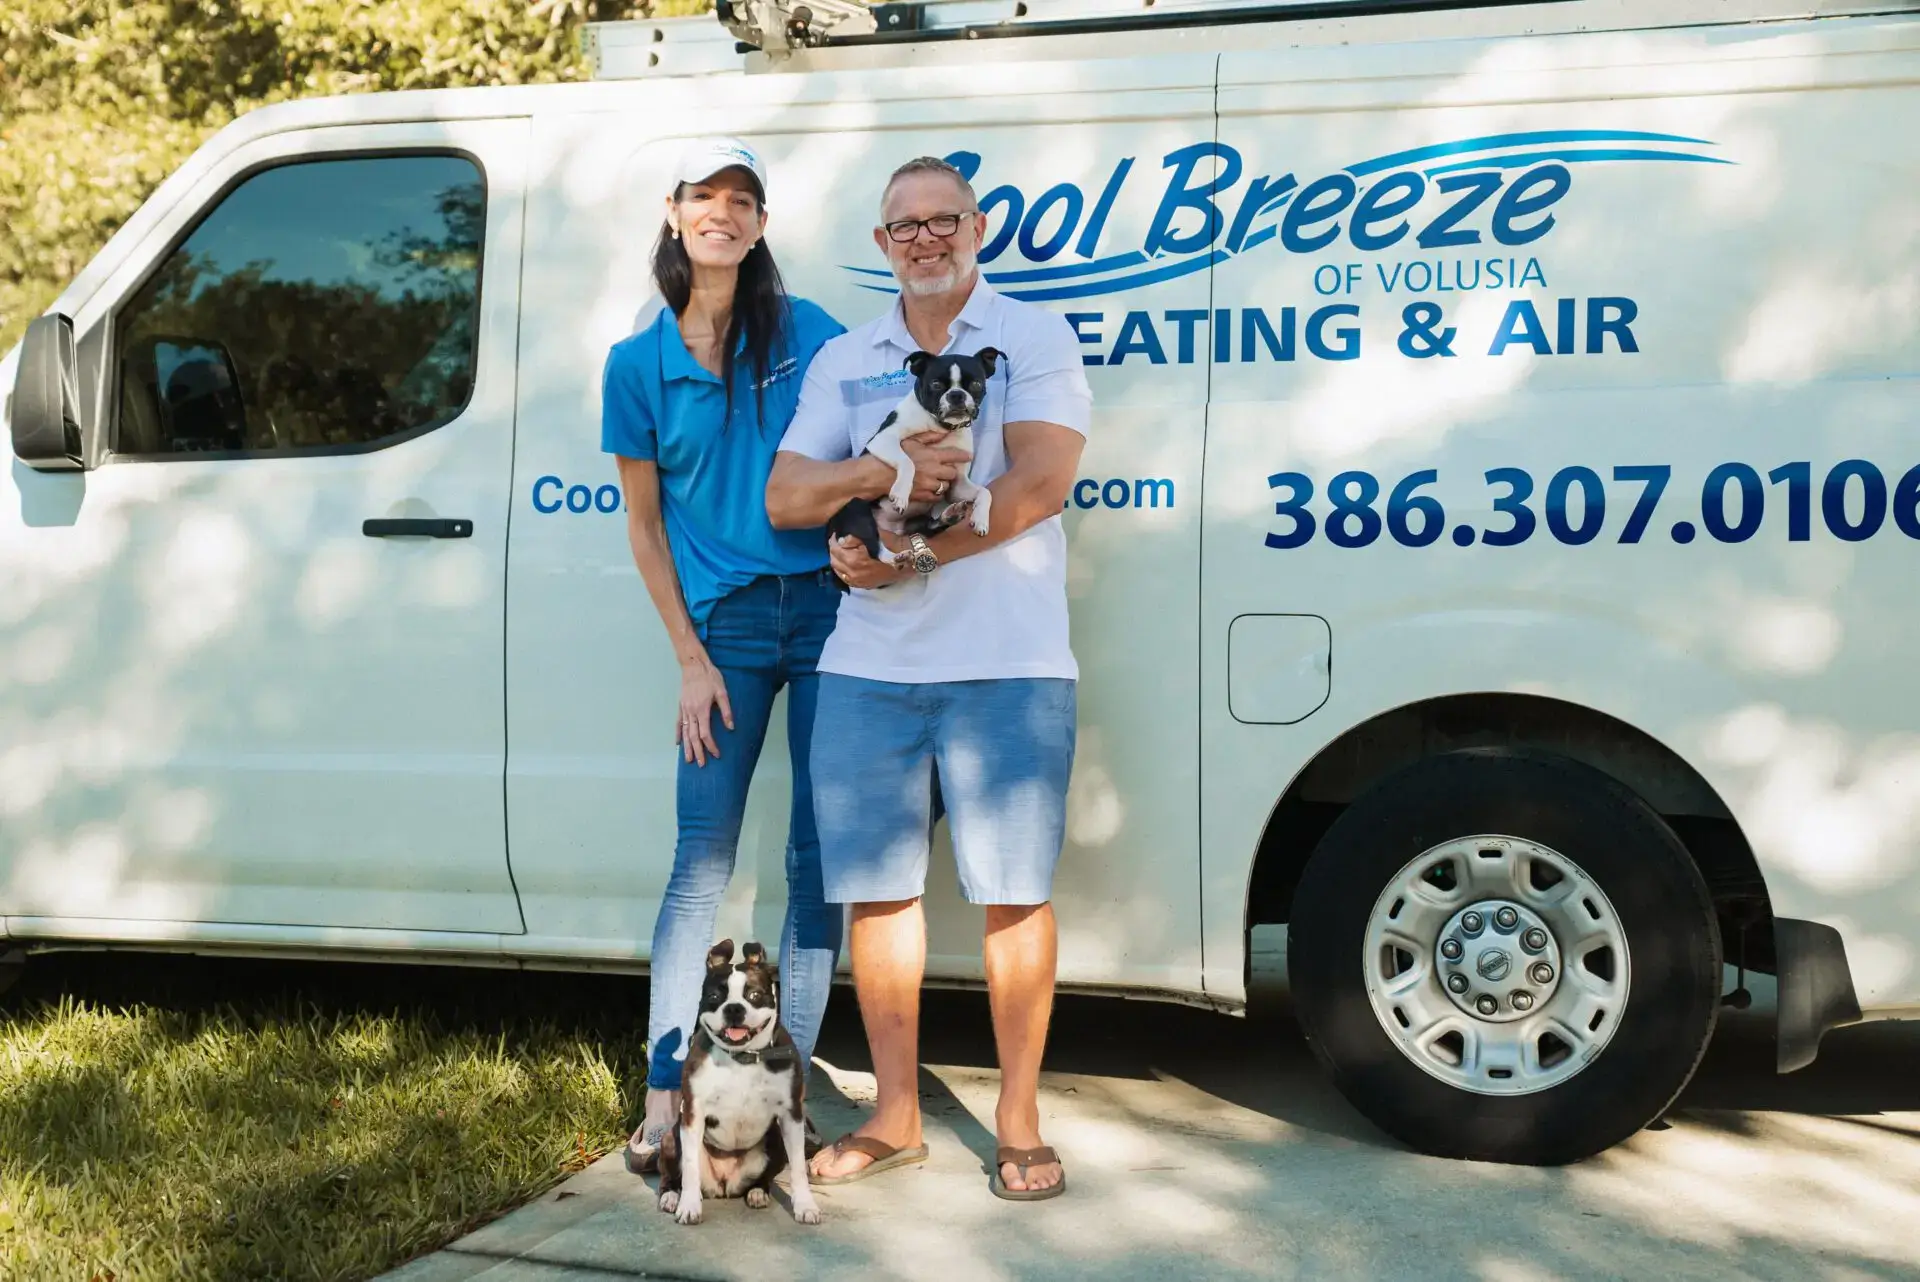 coolbreeze owners with their pet